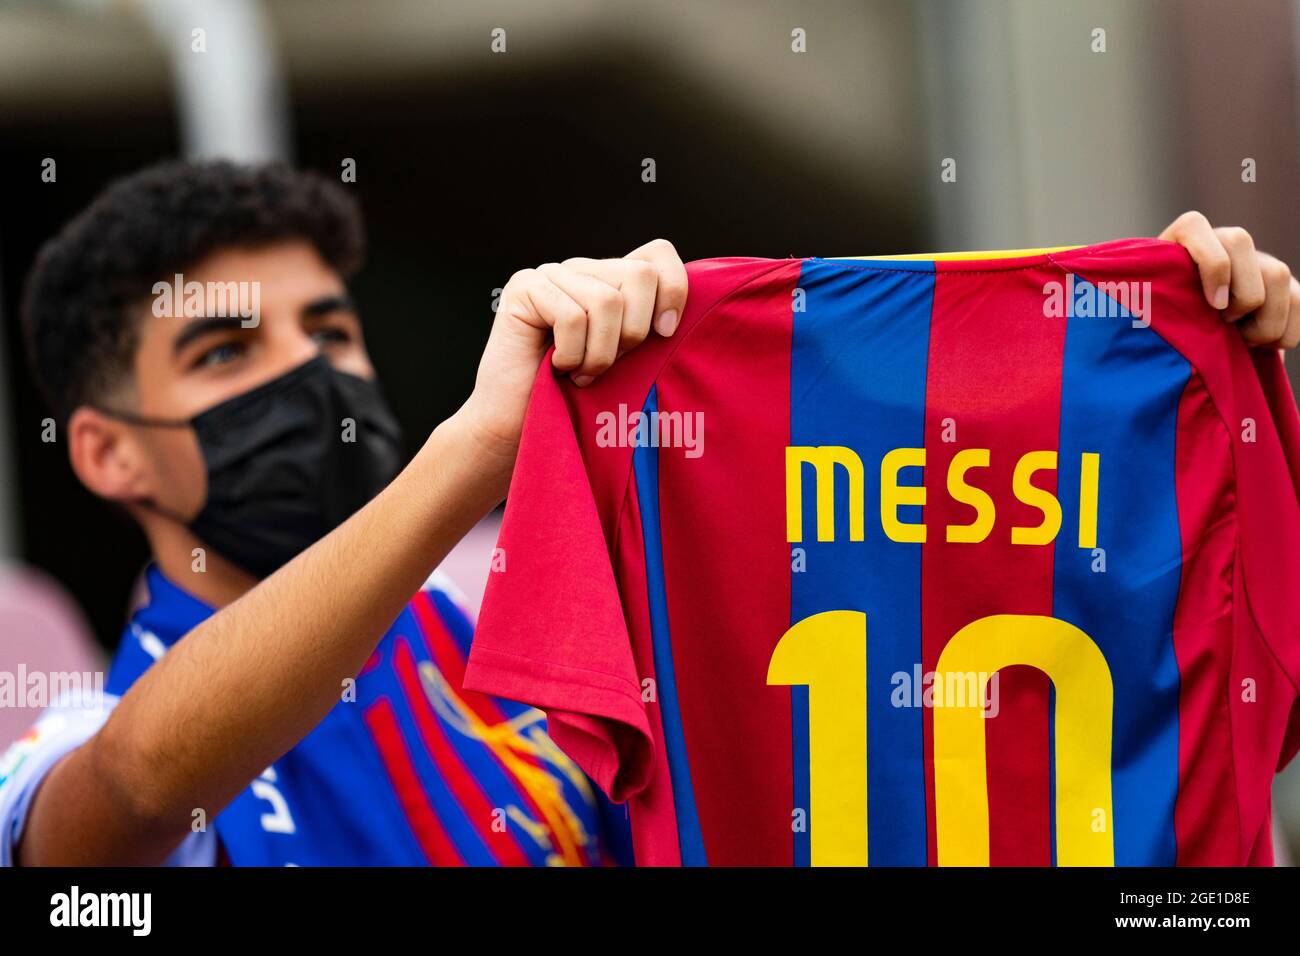 Lionel Messi Jersey High Resolution Stock Photography and Images - Alamy